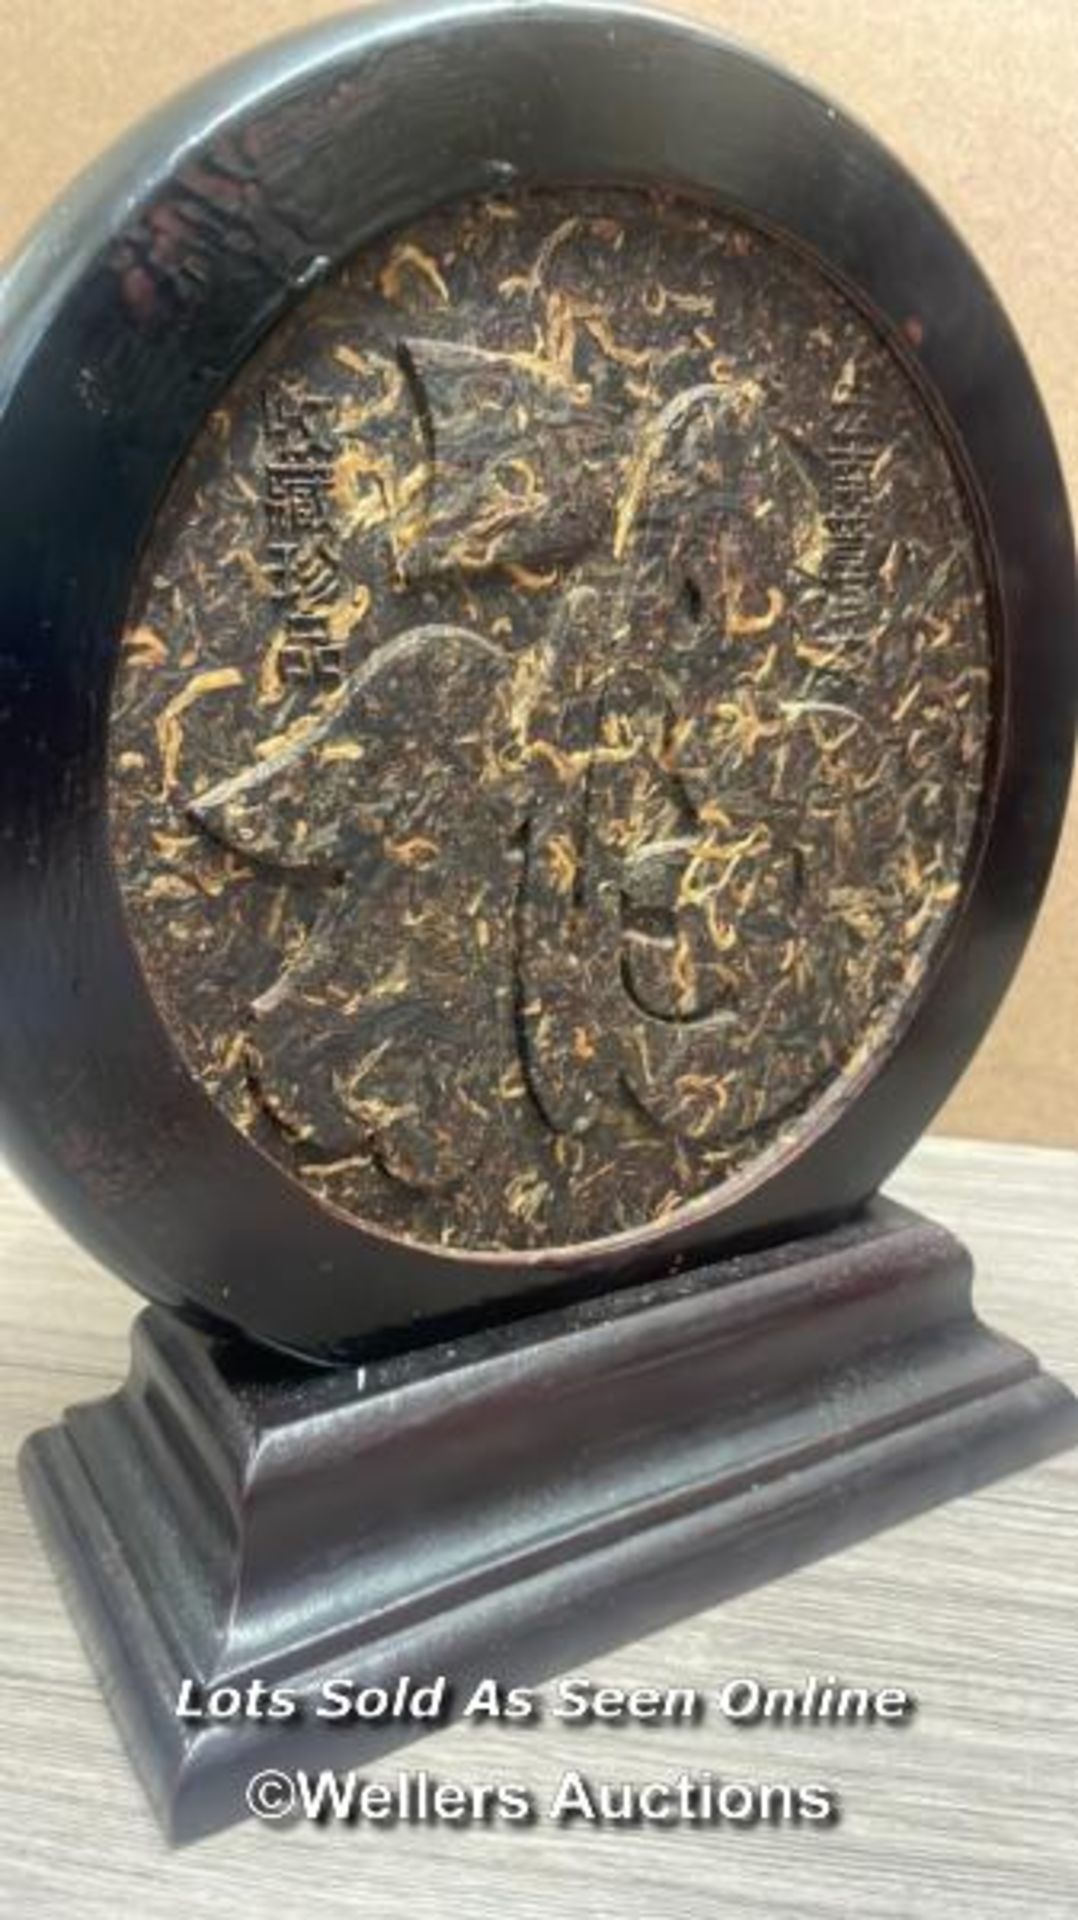 A CIRCULAR CHINESE COMPRESSED TEA BLOCK, 25.5CM HIGH (ON STAND) 23.5CM DIAMETER - Image 4 of 4